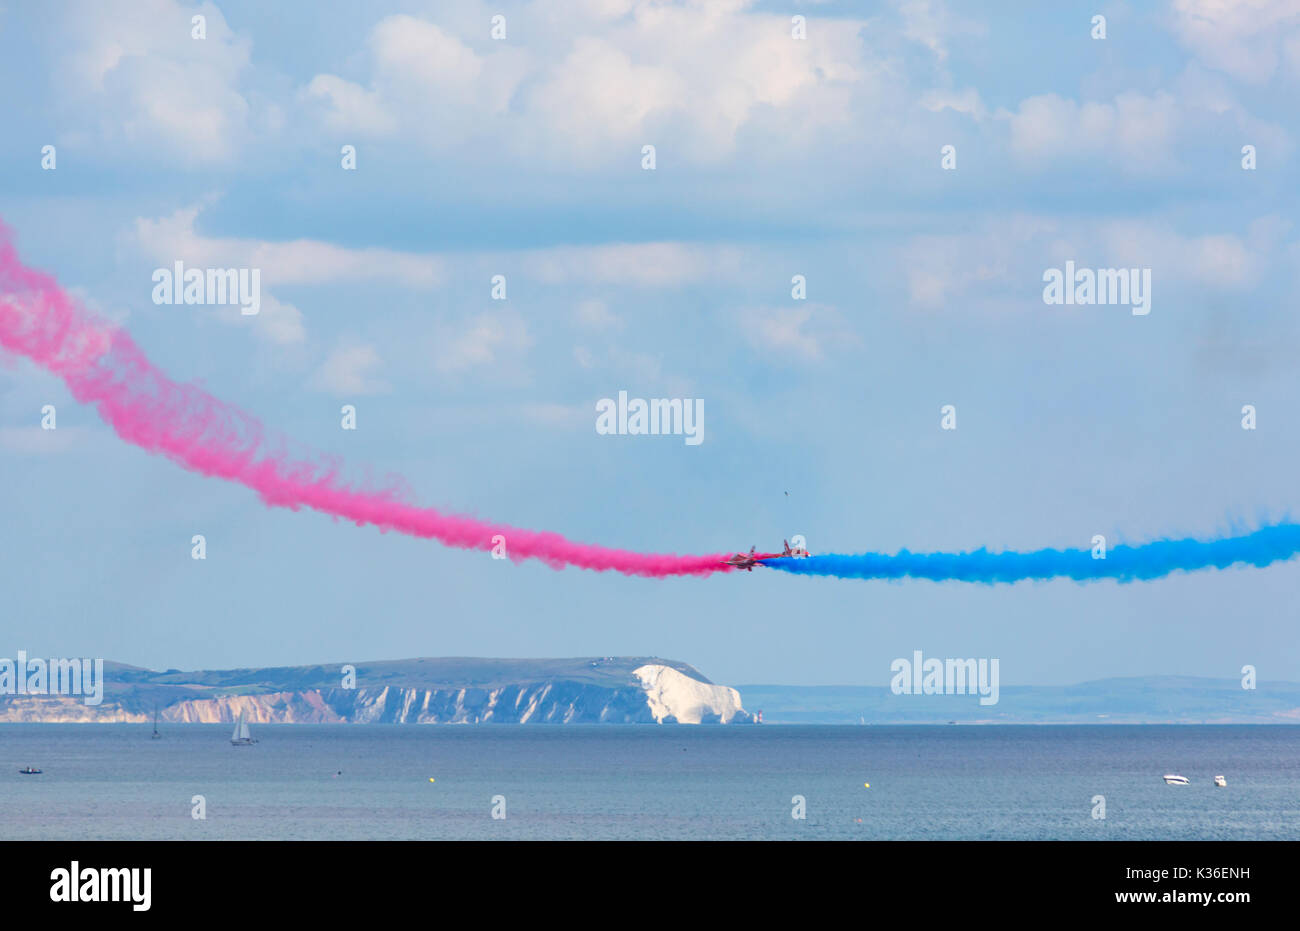 Bournemouth, Dorset UK. 1st Sep, 2017. The second day of the tenth anniversary of the Bournemouth Air Festival. The Red Arrows thrill the crowds, two cross over with coastline of Isle of Wight and the Needles in the distance. Credit: Carolyn Jenkins/Alamy Live News Stock Photo